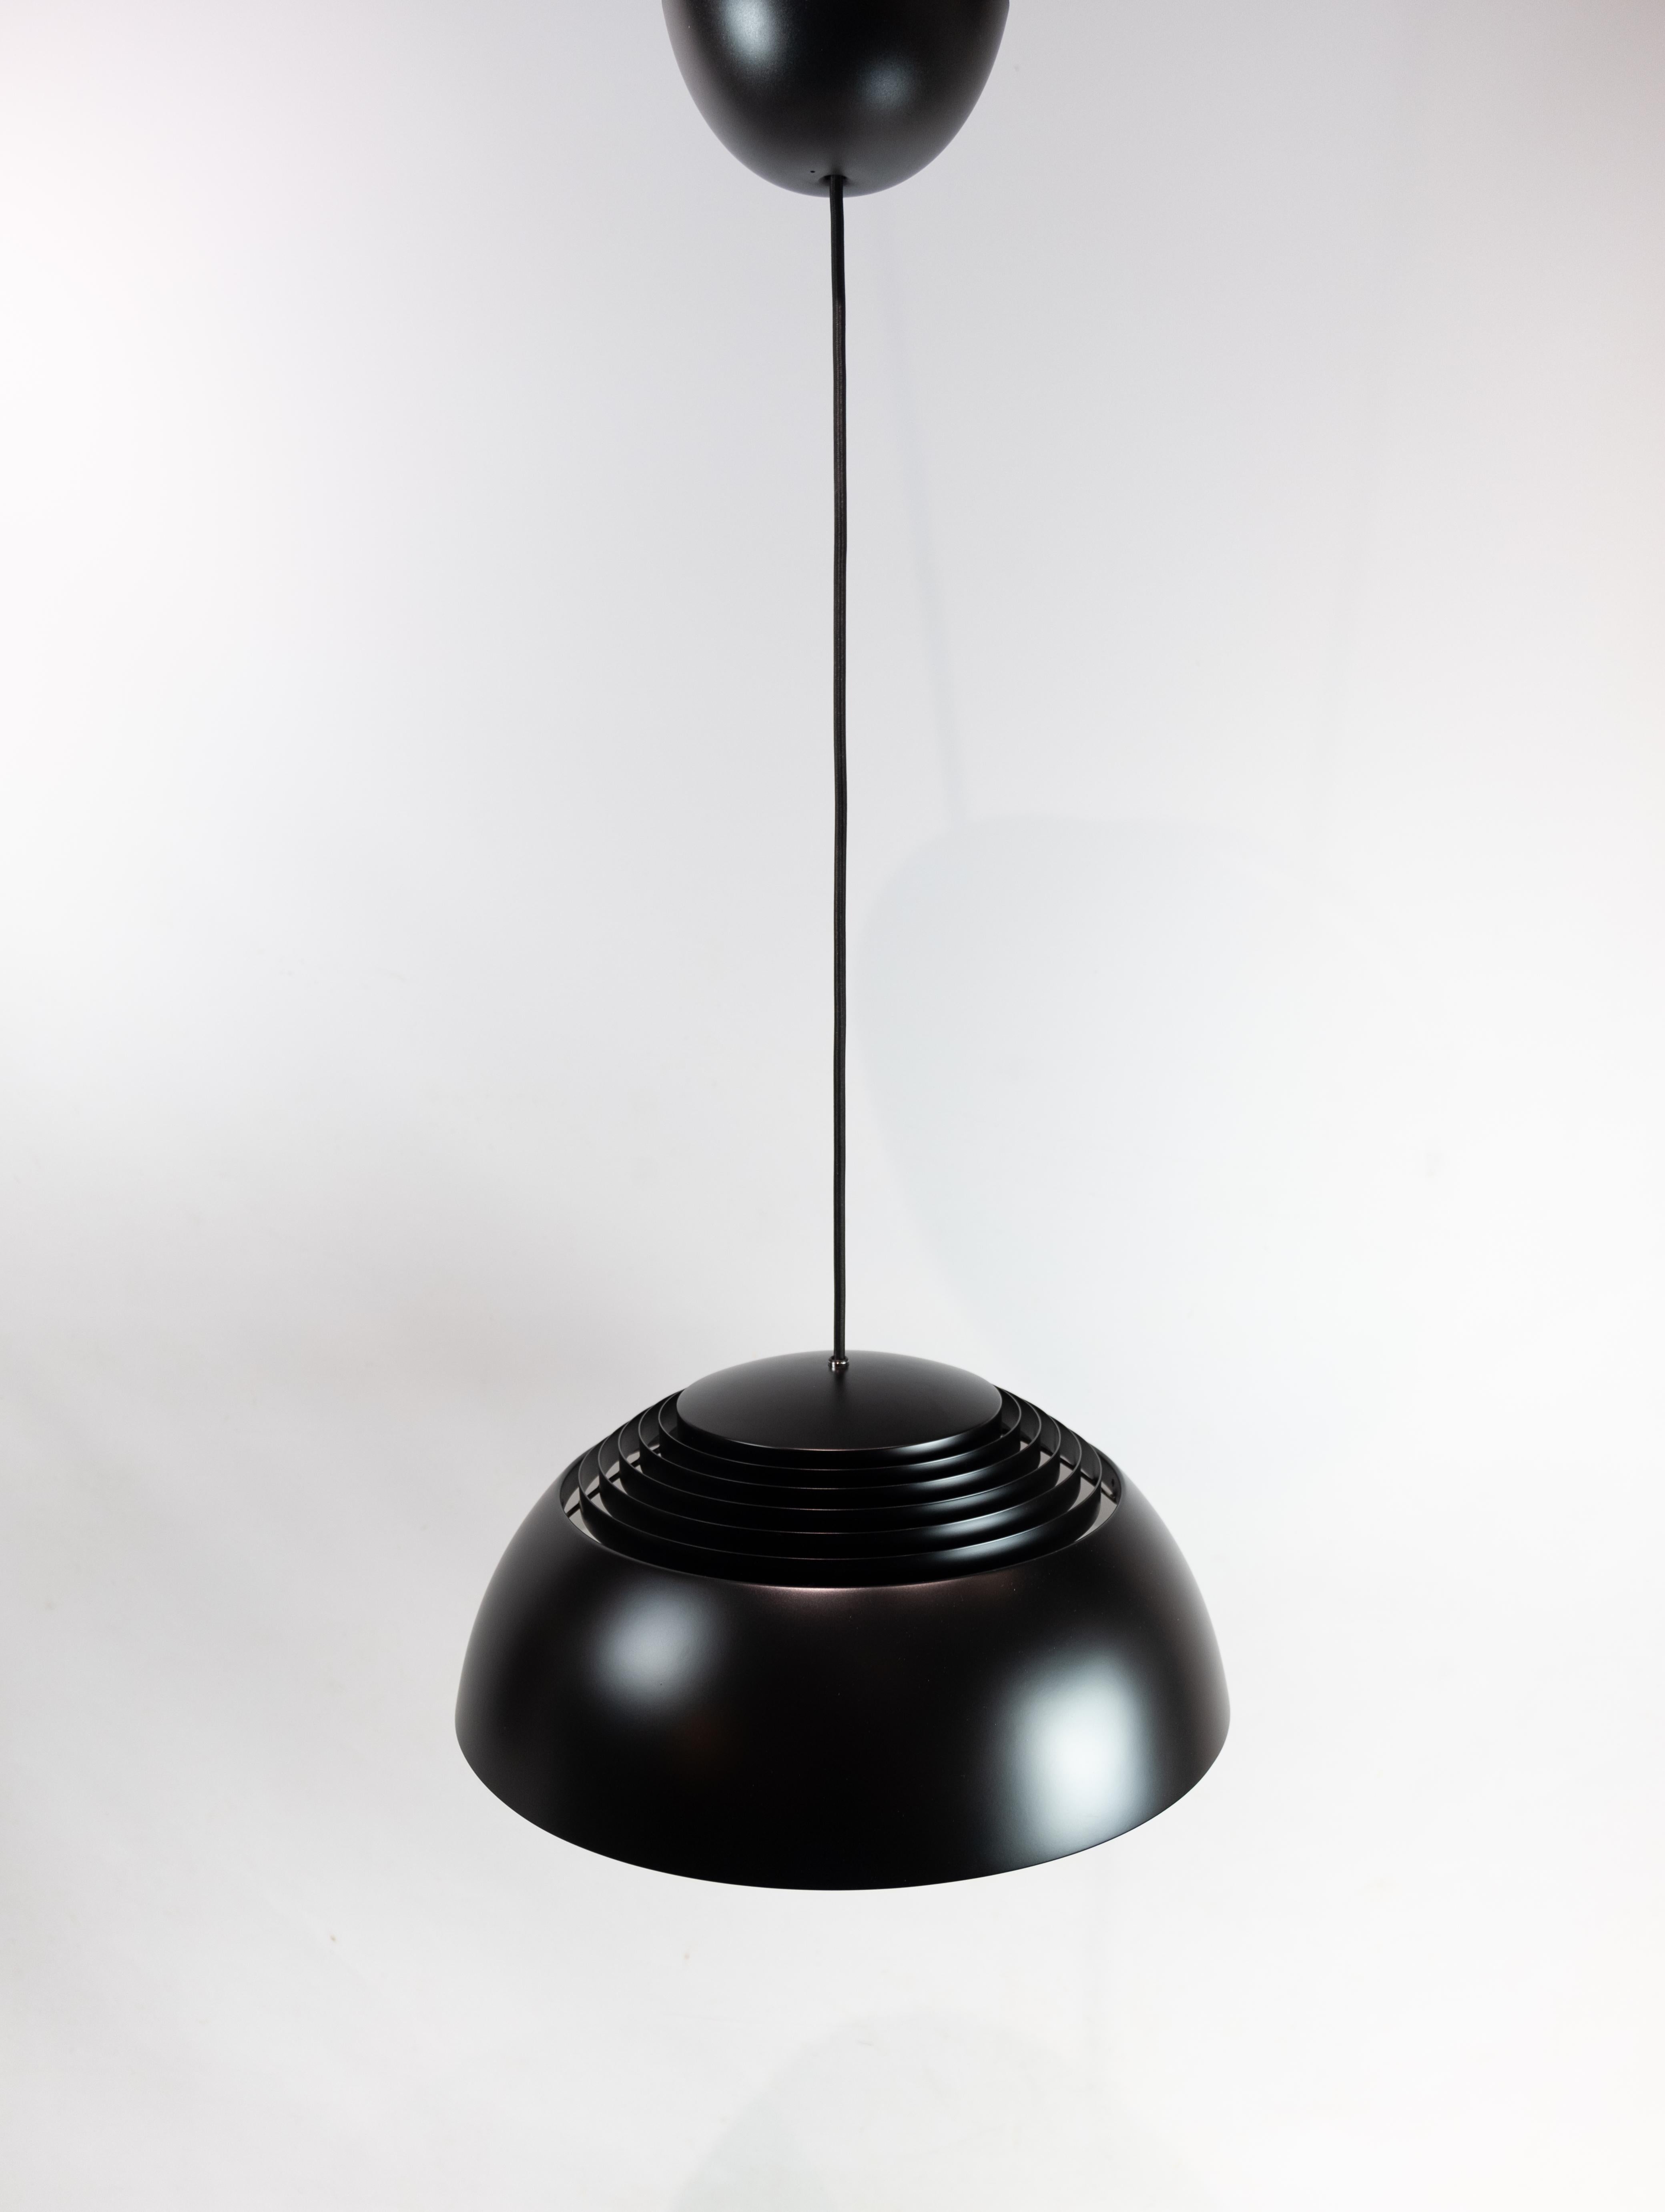 Ceiling pendant, Royal, in black metal designed by Arne Jacobsen and manufactured by Louis Poulsen. The lamp is in great vintage condition.